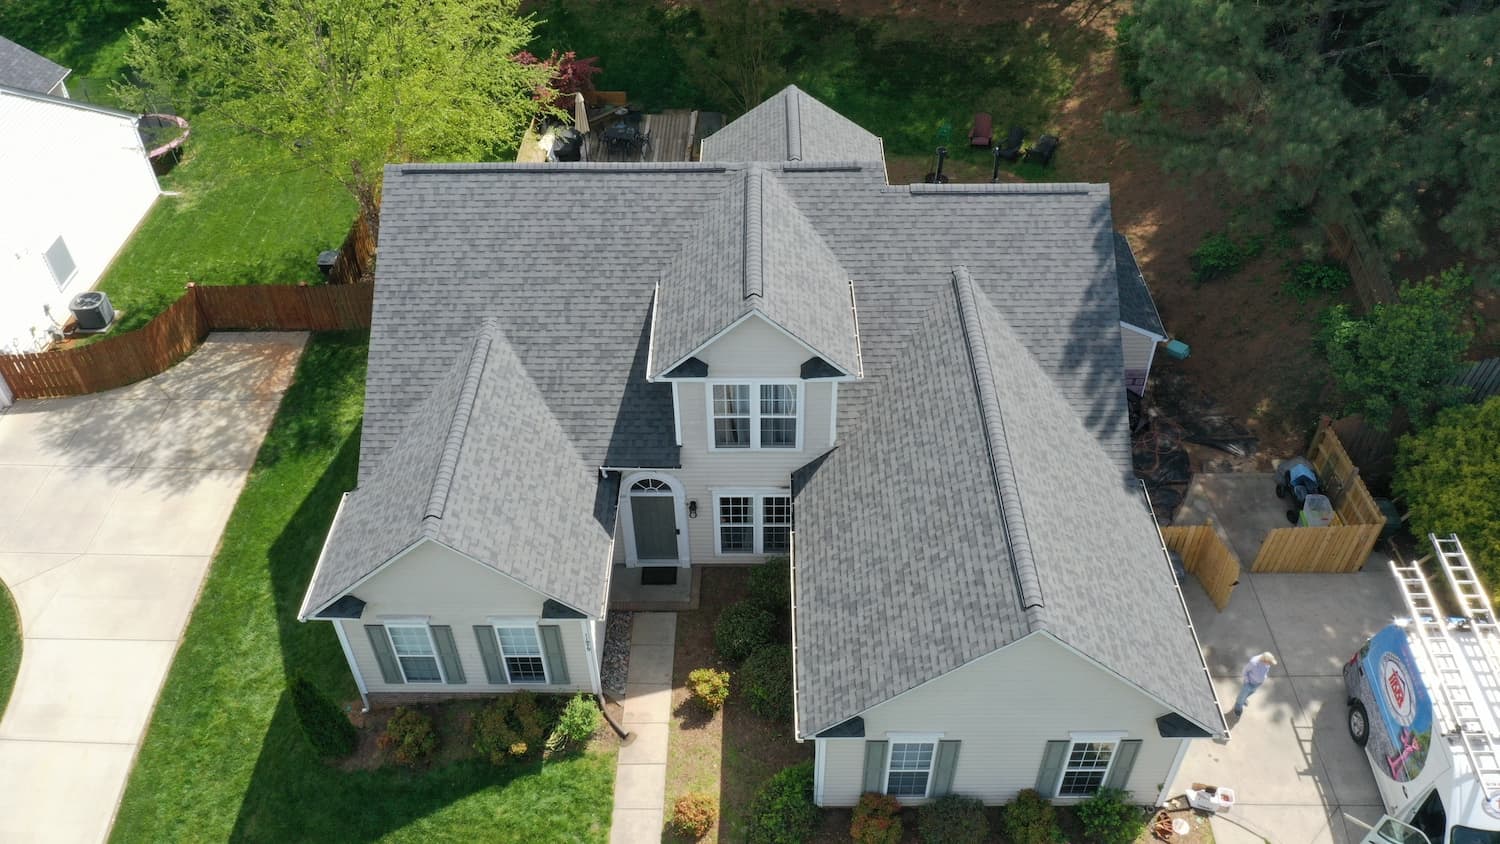 http://trudefinition%20duration%20gray%20shingles%20on%20residential%20home;%20aerial%20view